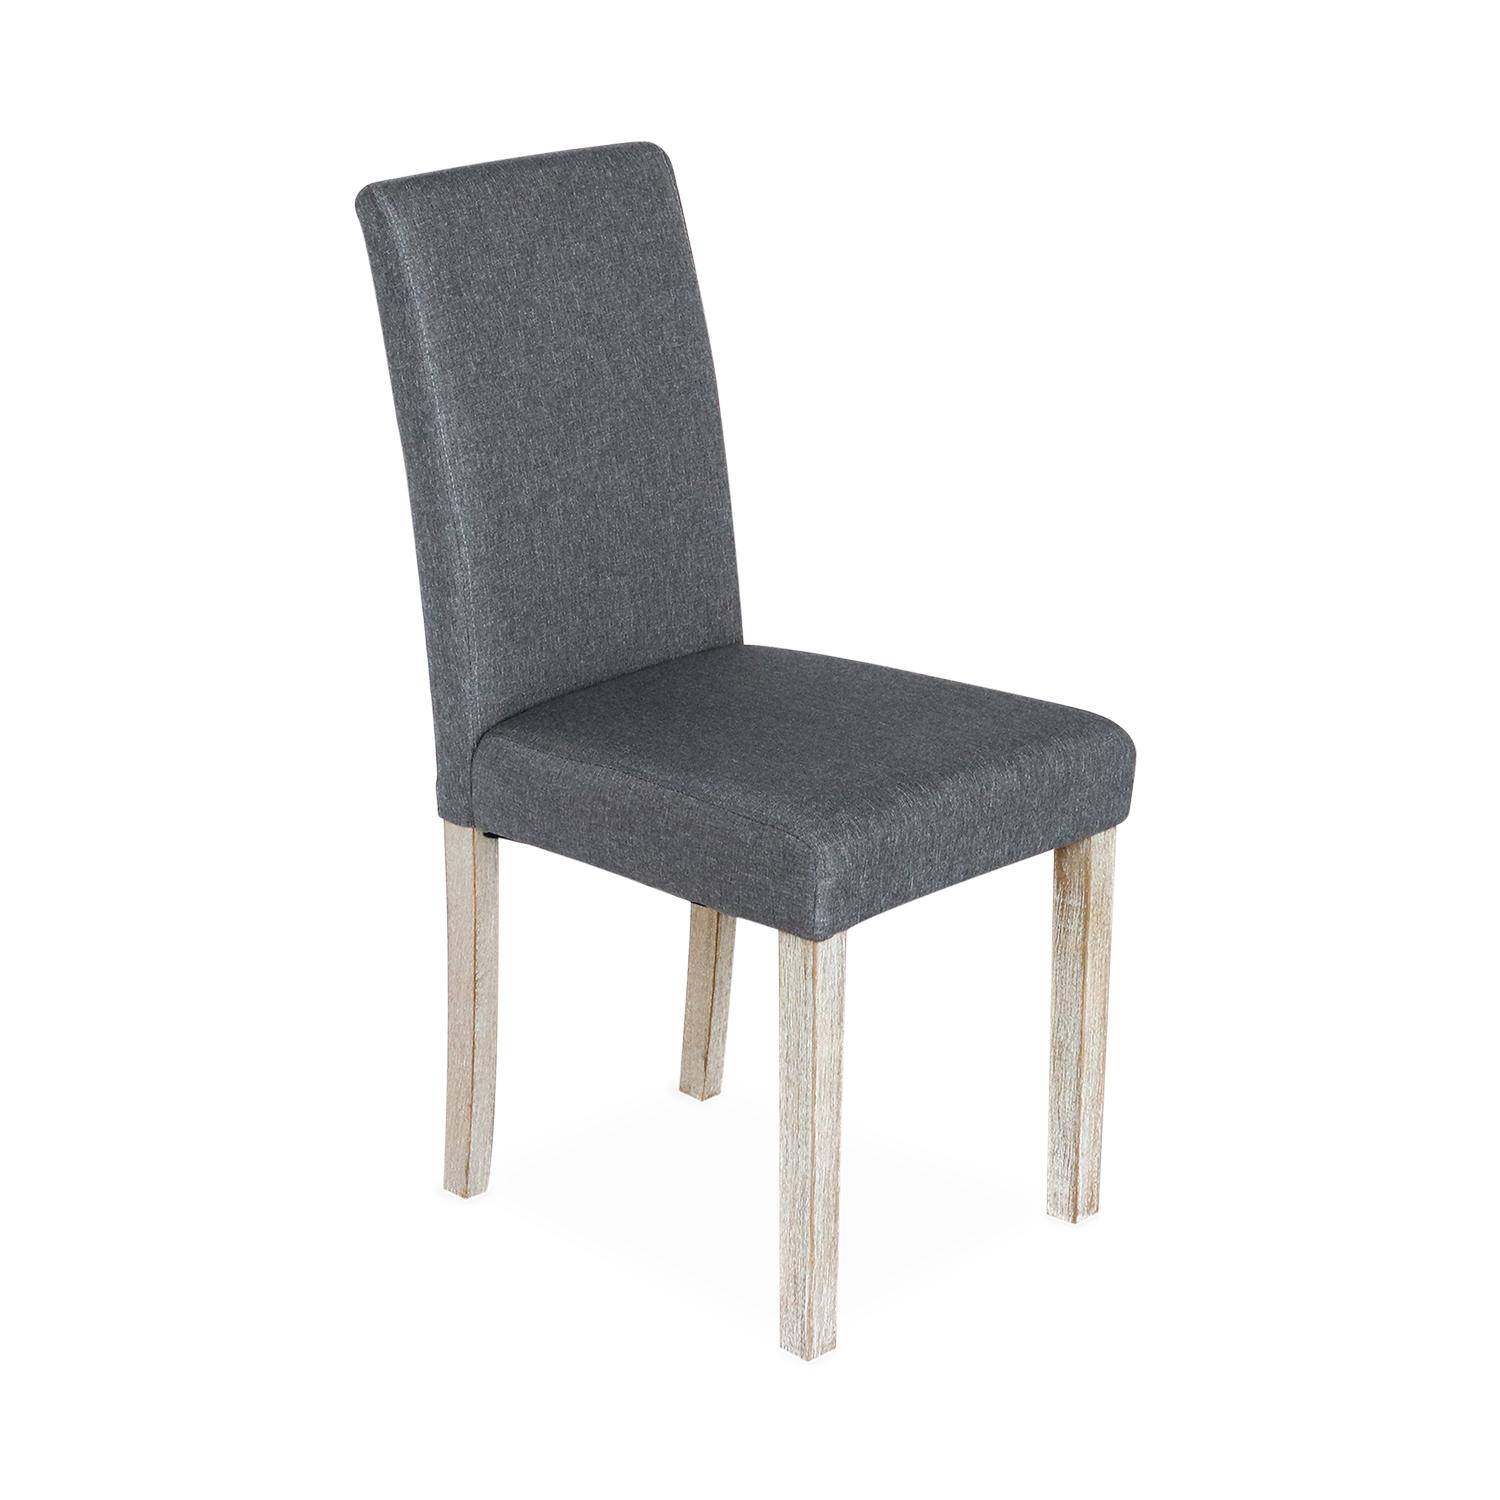 Set of 4 fabric dining chairs with wooden legs - Rita - Charcoal grey,sweeek,Photo4